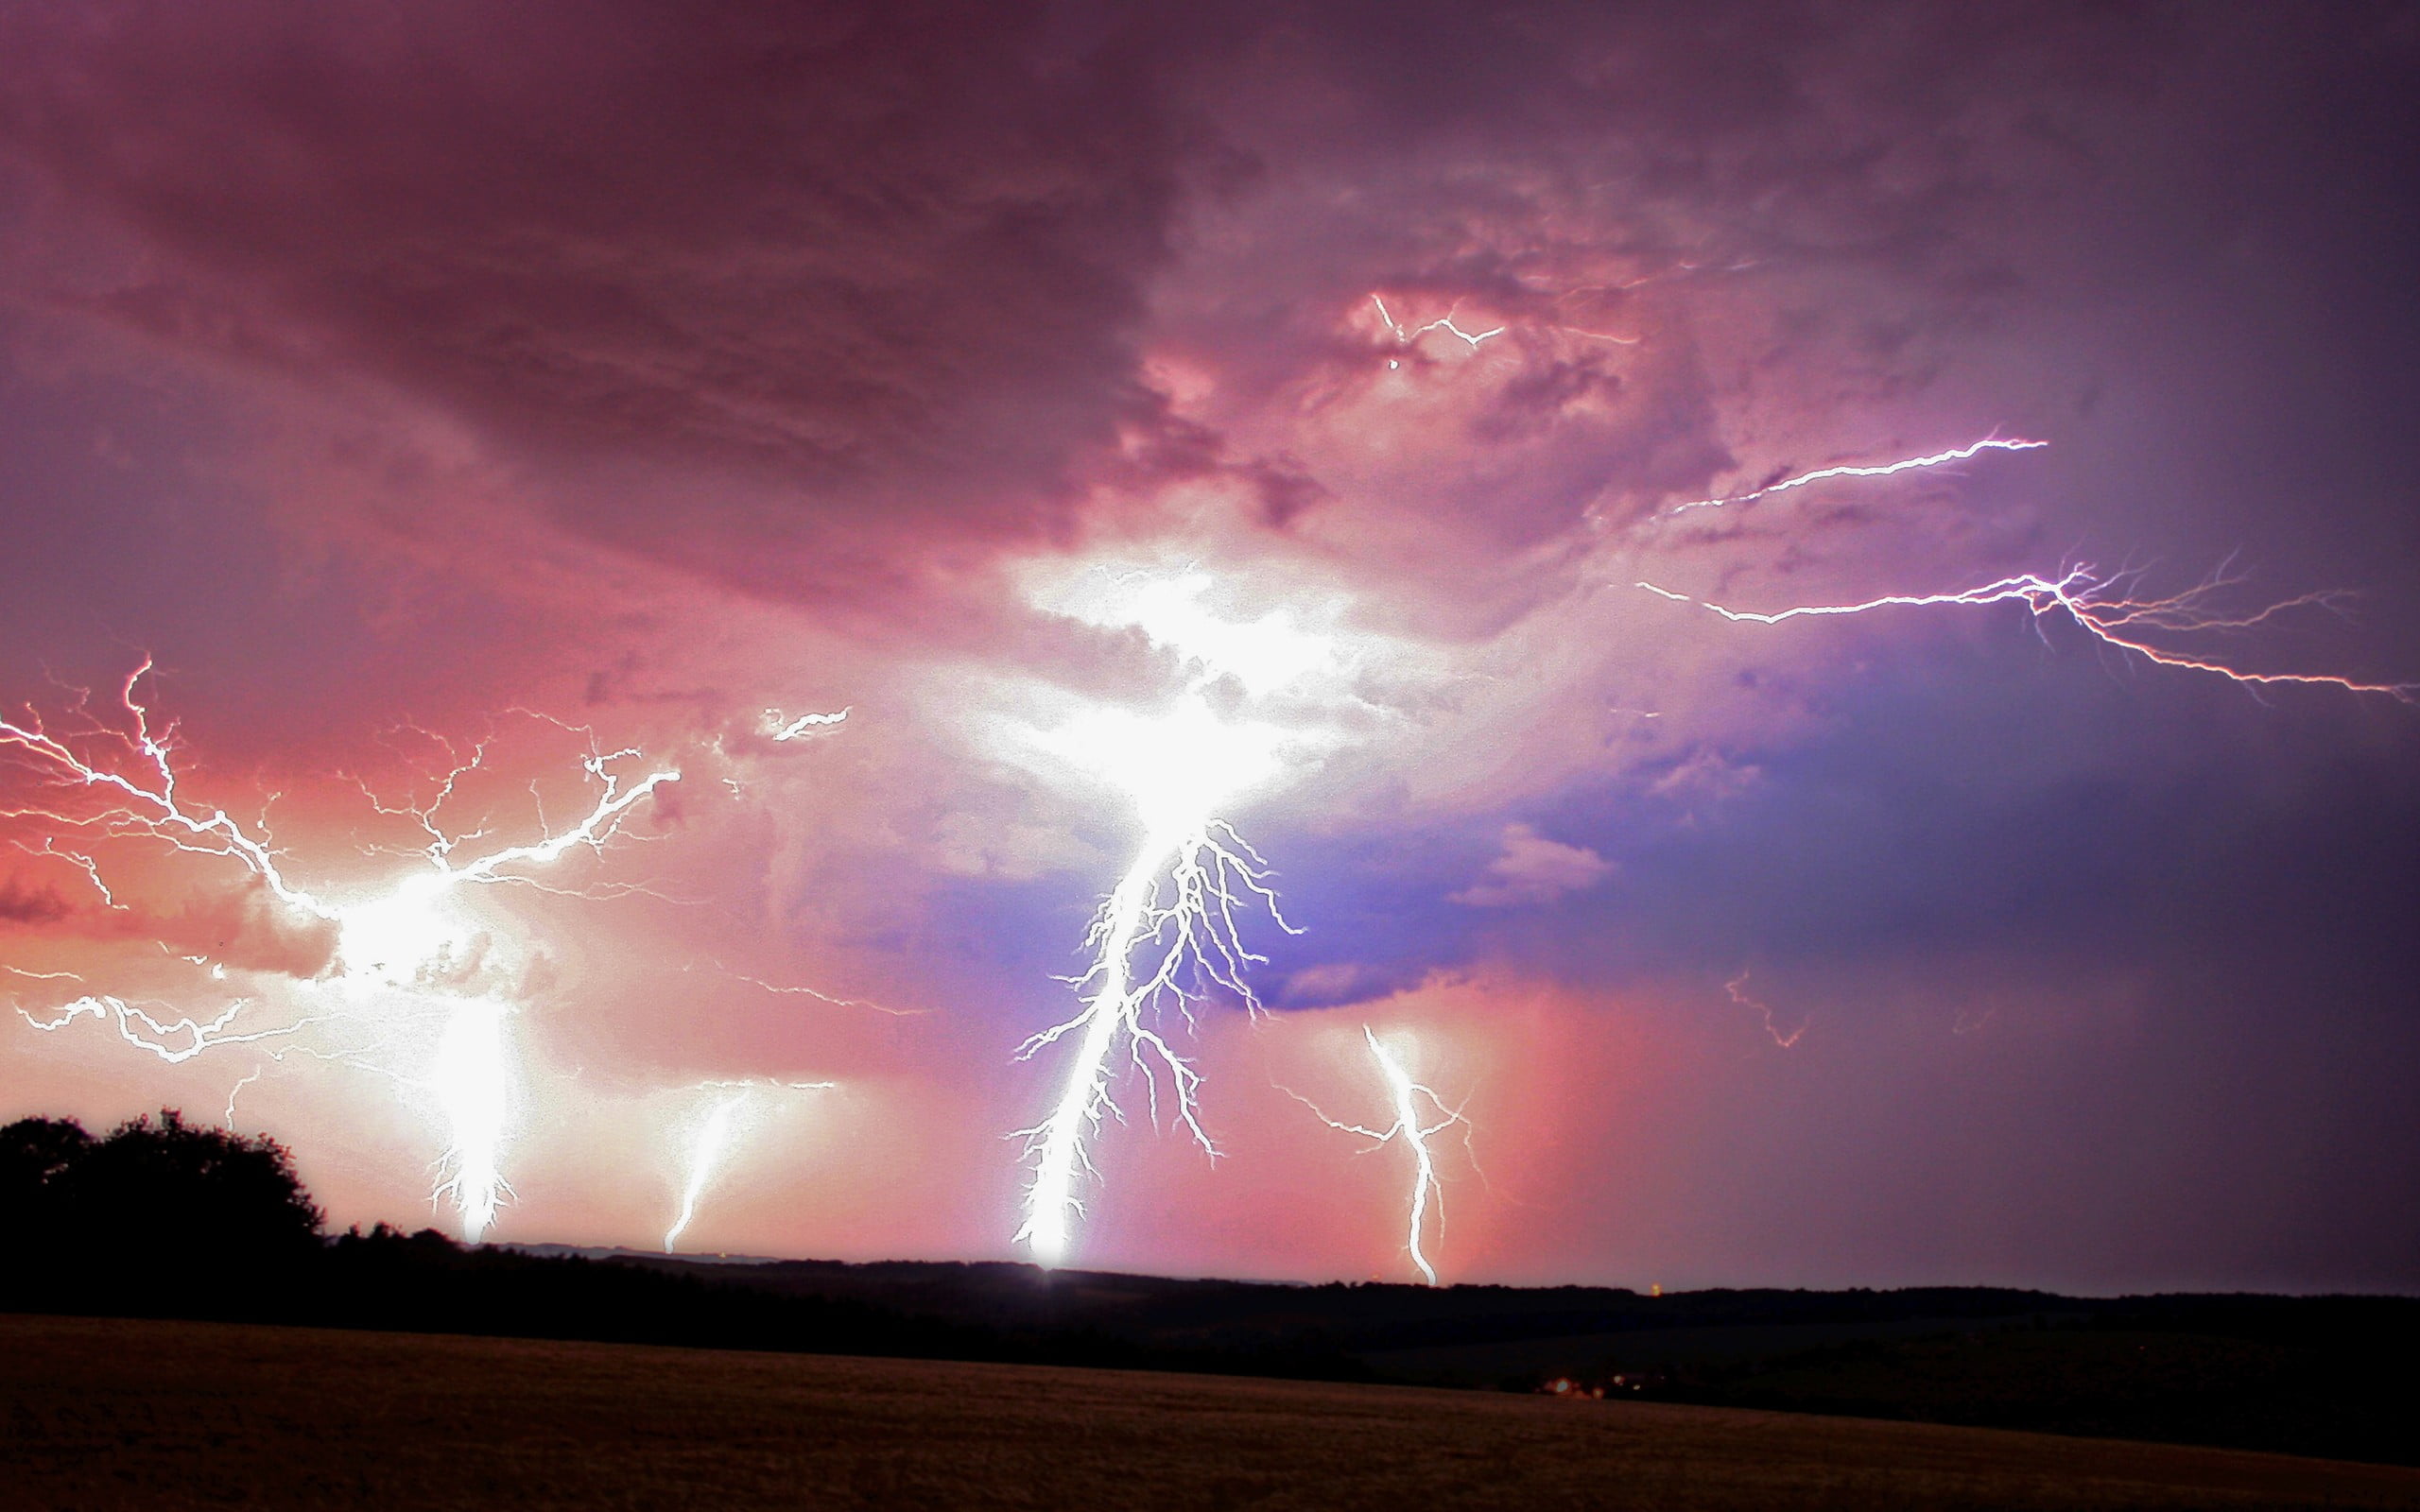 lightning photo, storm, nature, cloud - sky, power in nature